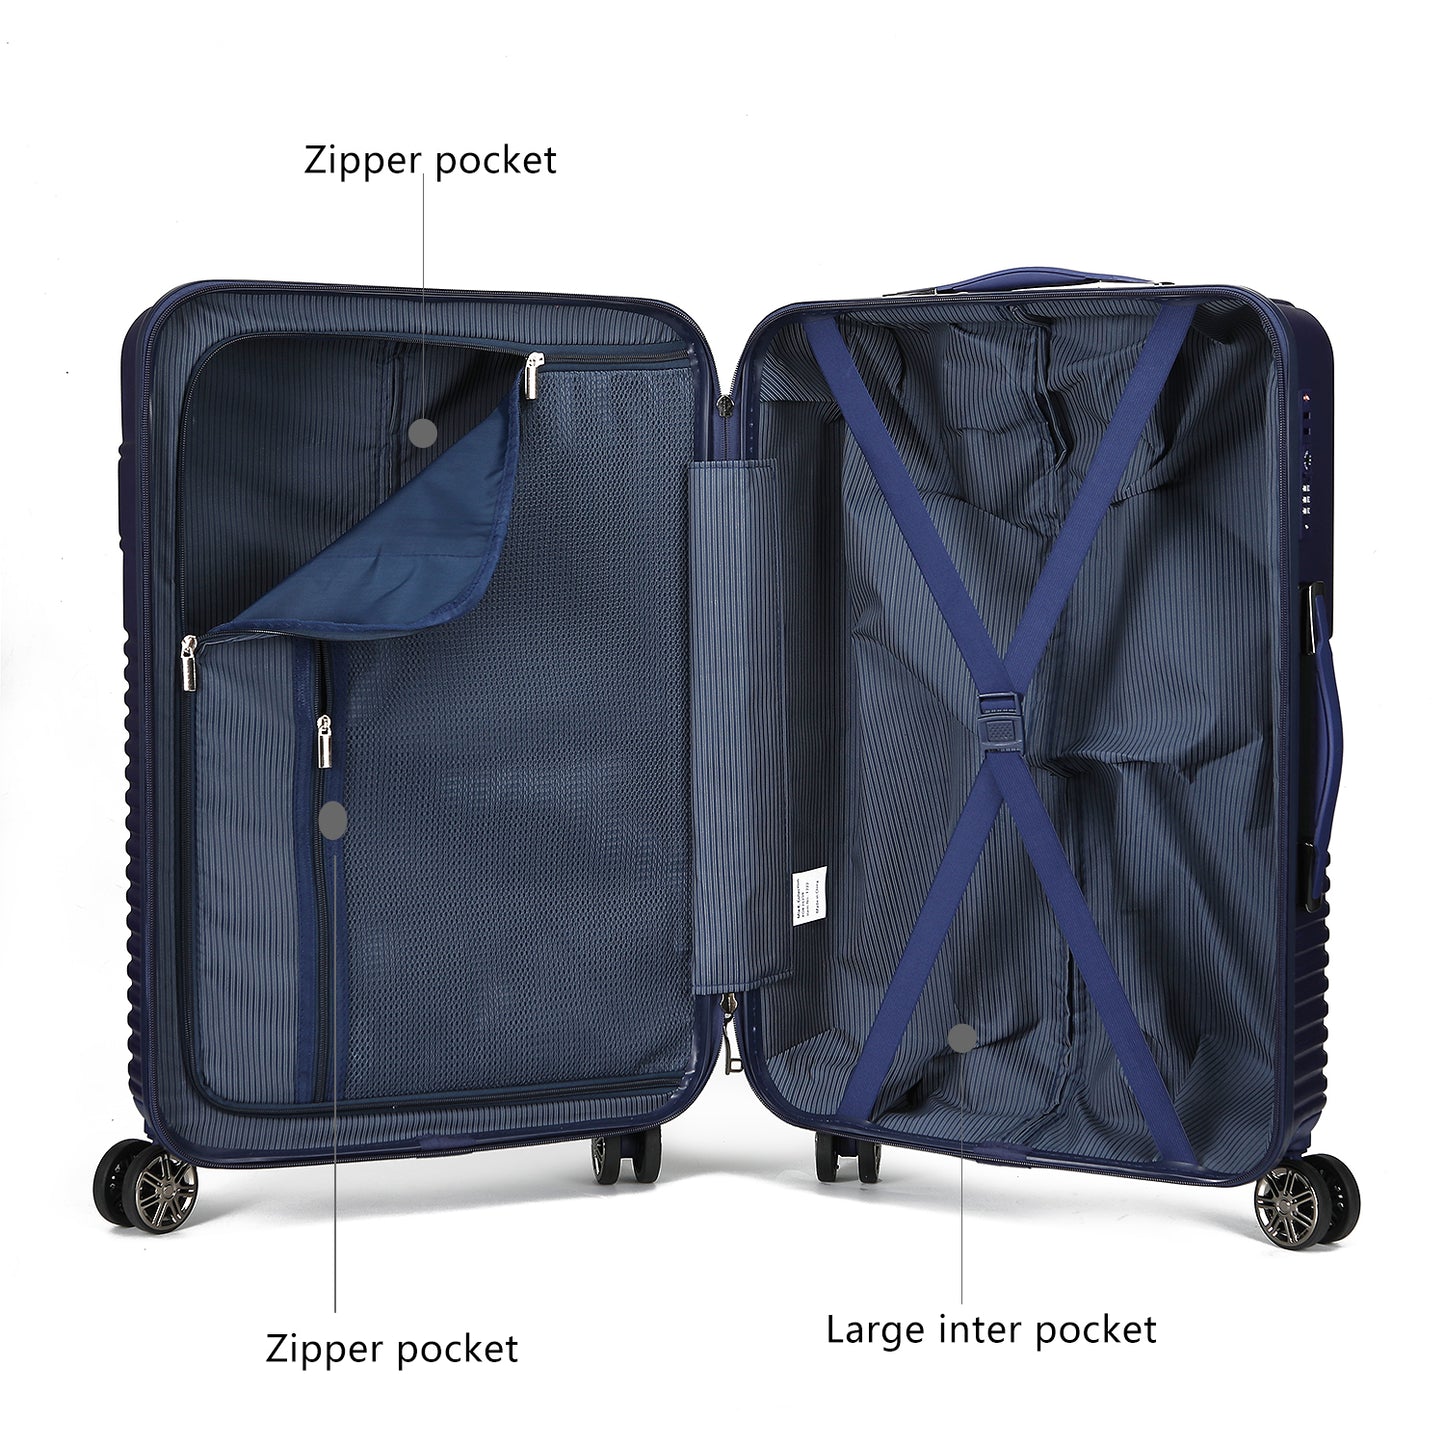 Mykonos Luggage Set with a Medium Carry-on and Small Cosmetic Case